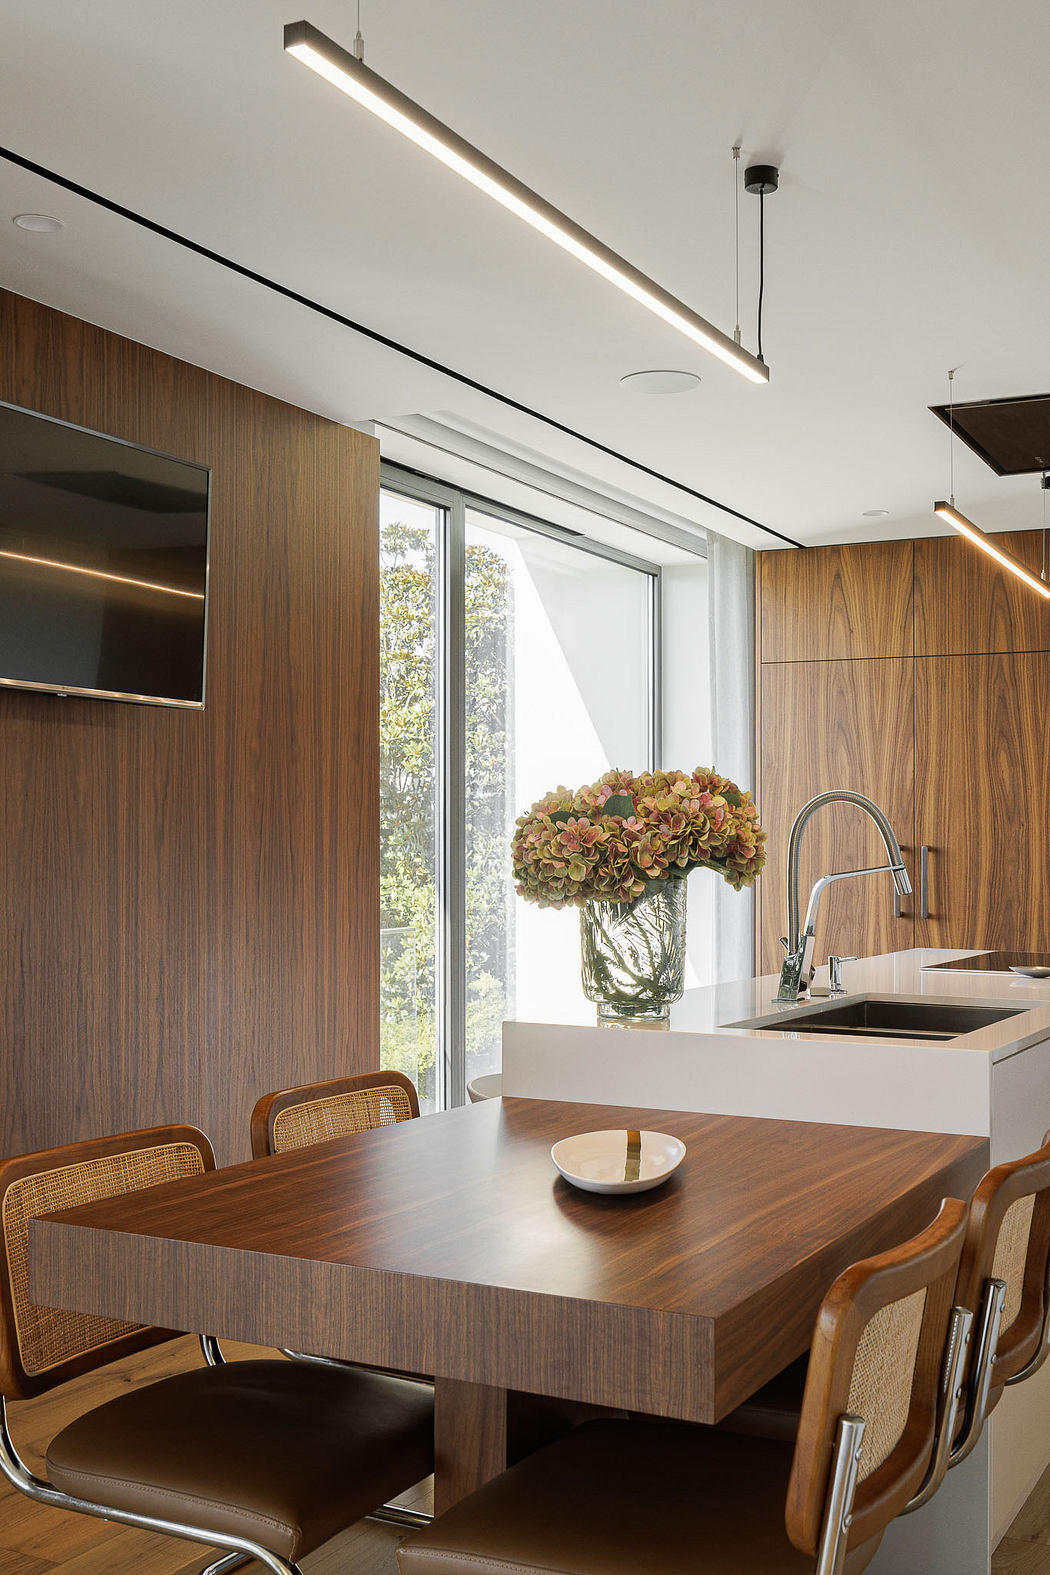 Modern kitchen with wooden finishes and a dining table with flowers.